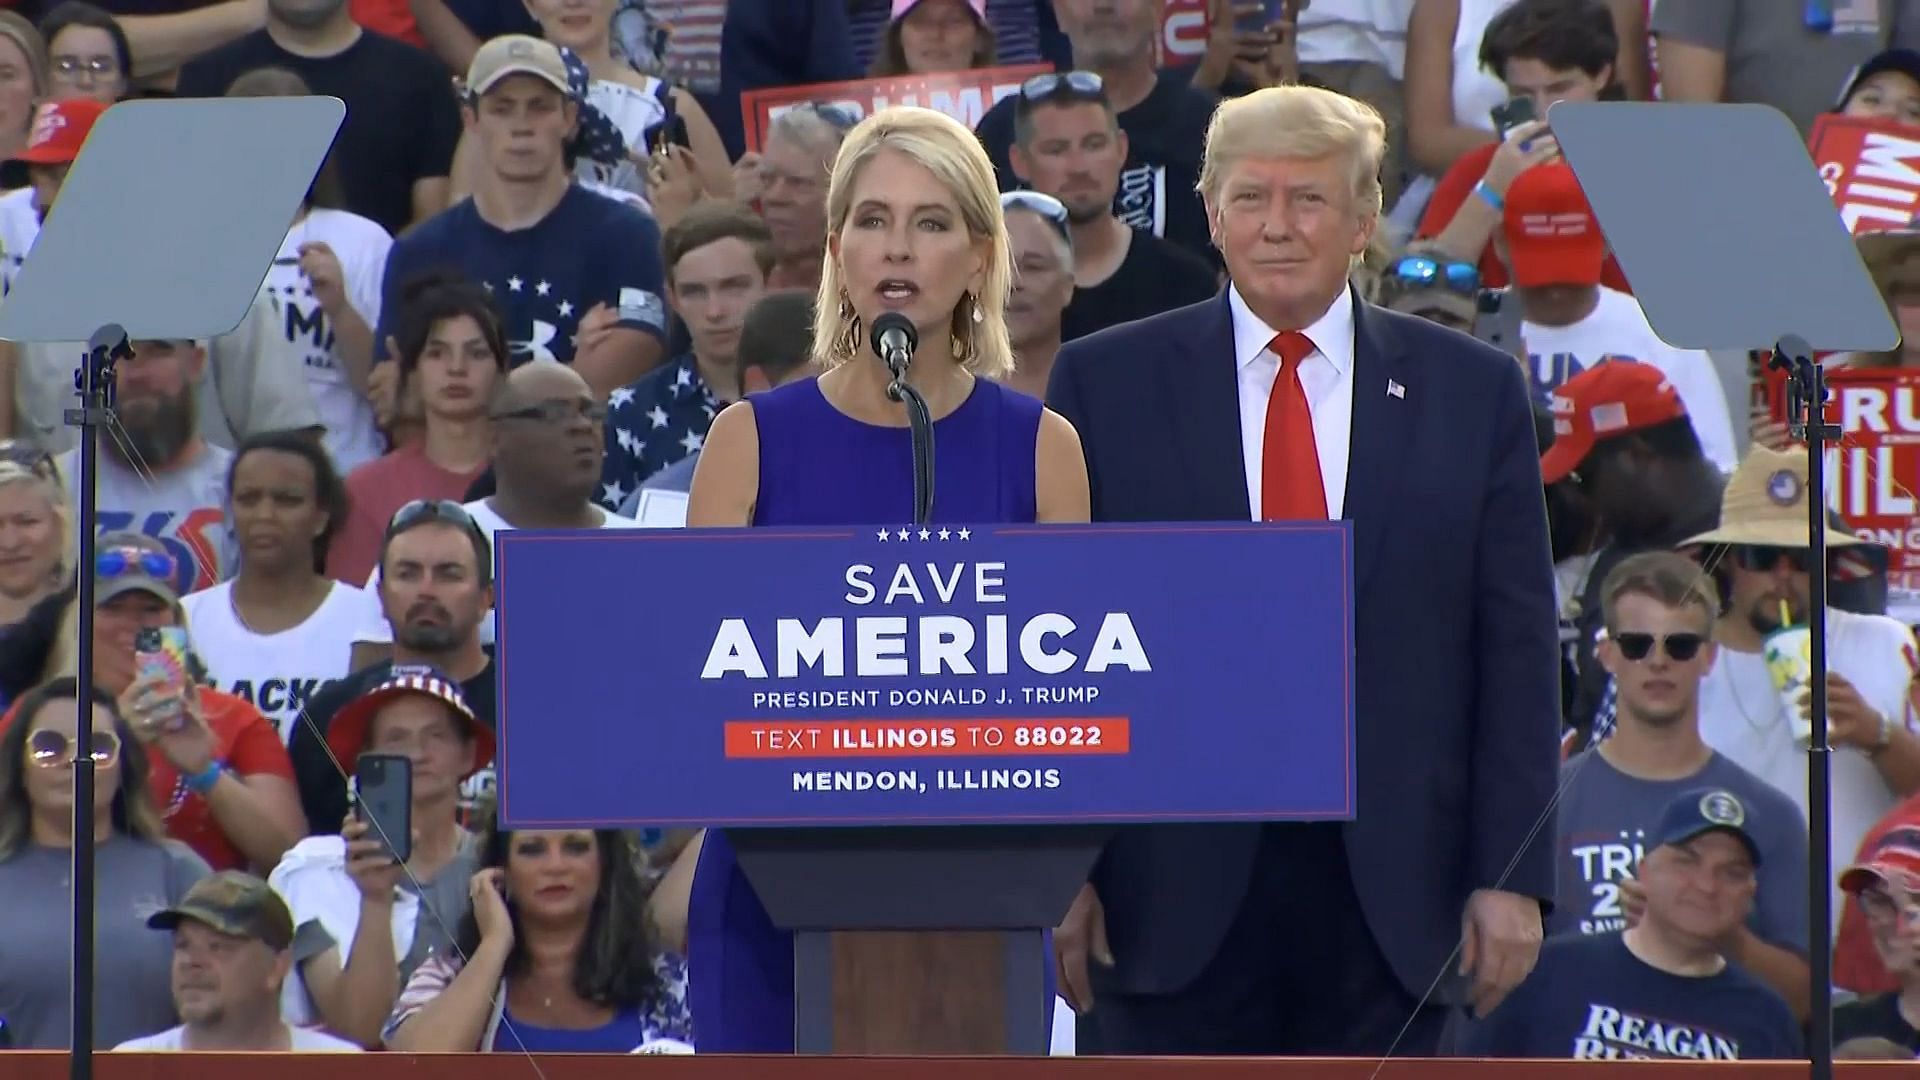 Rep. Mary Miller has been heavily criticized for her &quot;white life&quot; comments at the Save America Illinois rally (Image via NBC News)